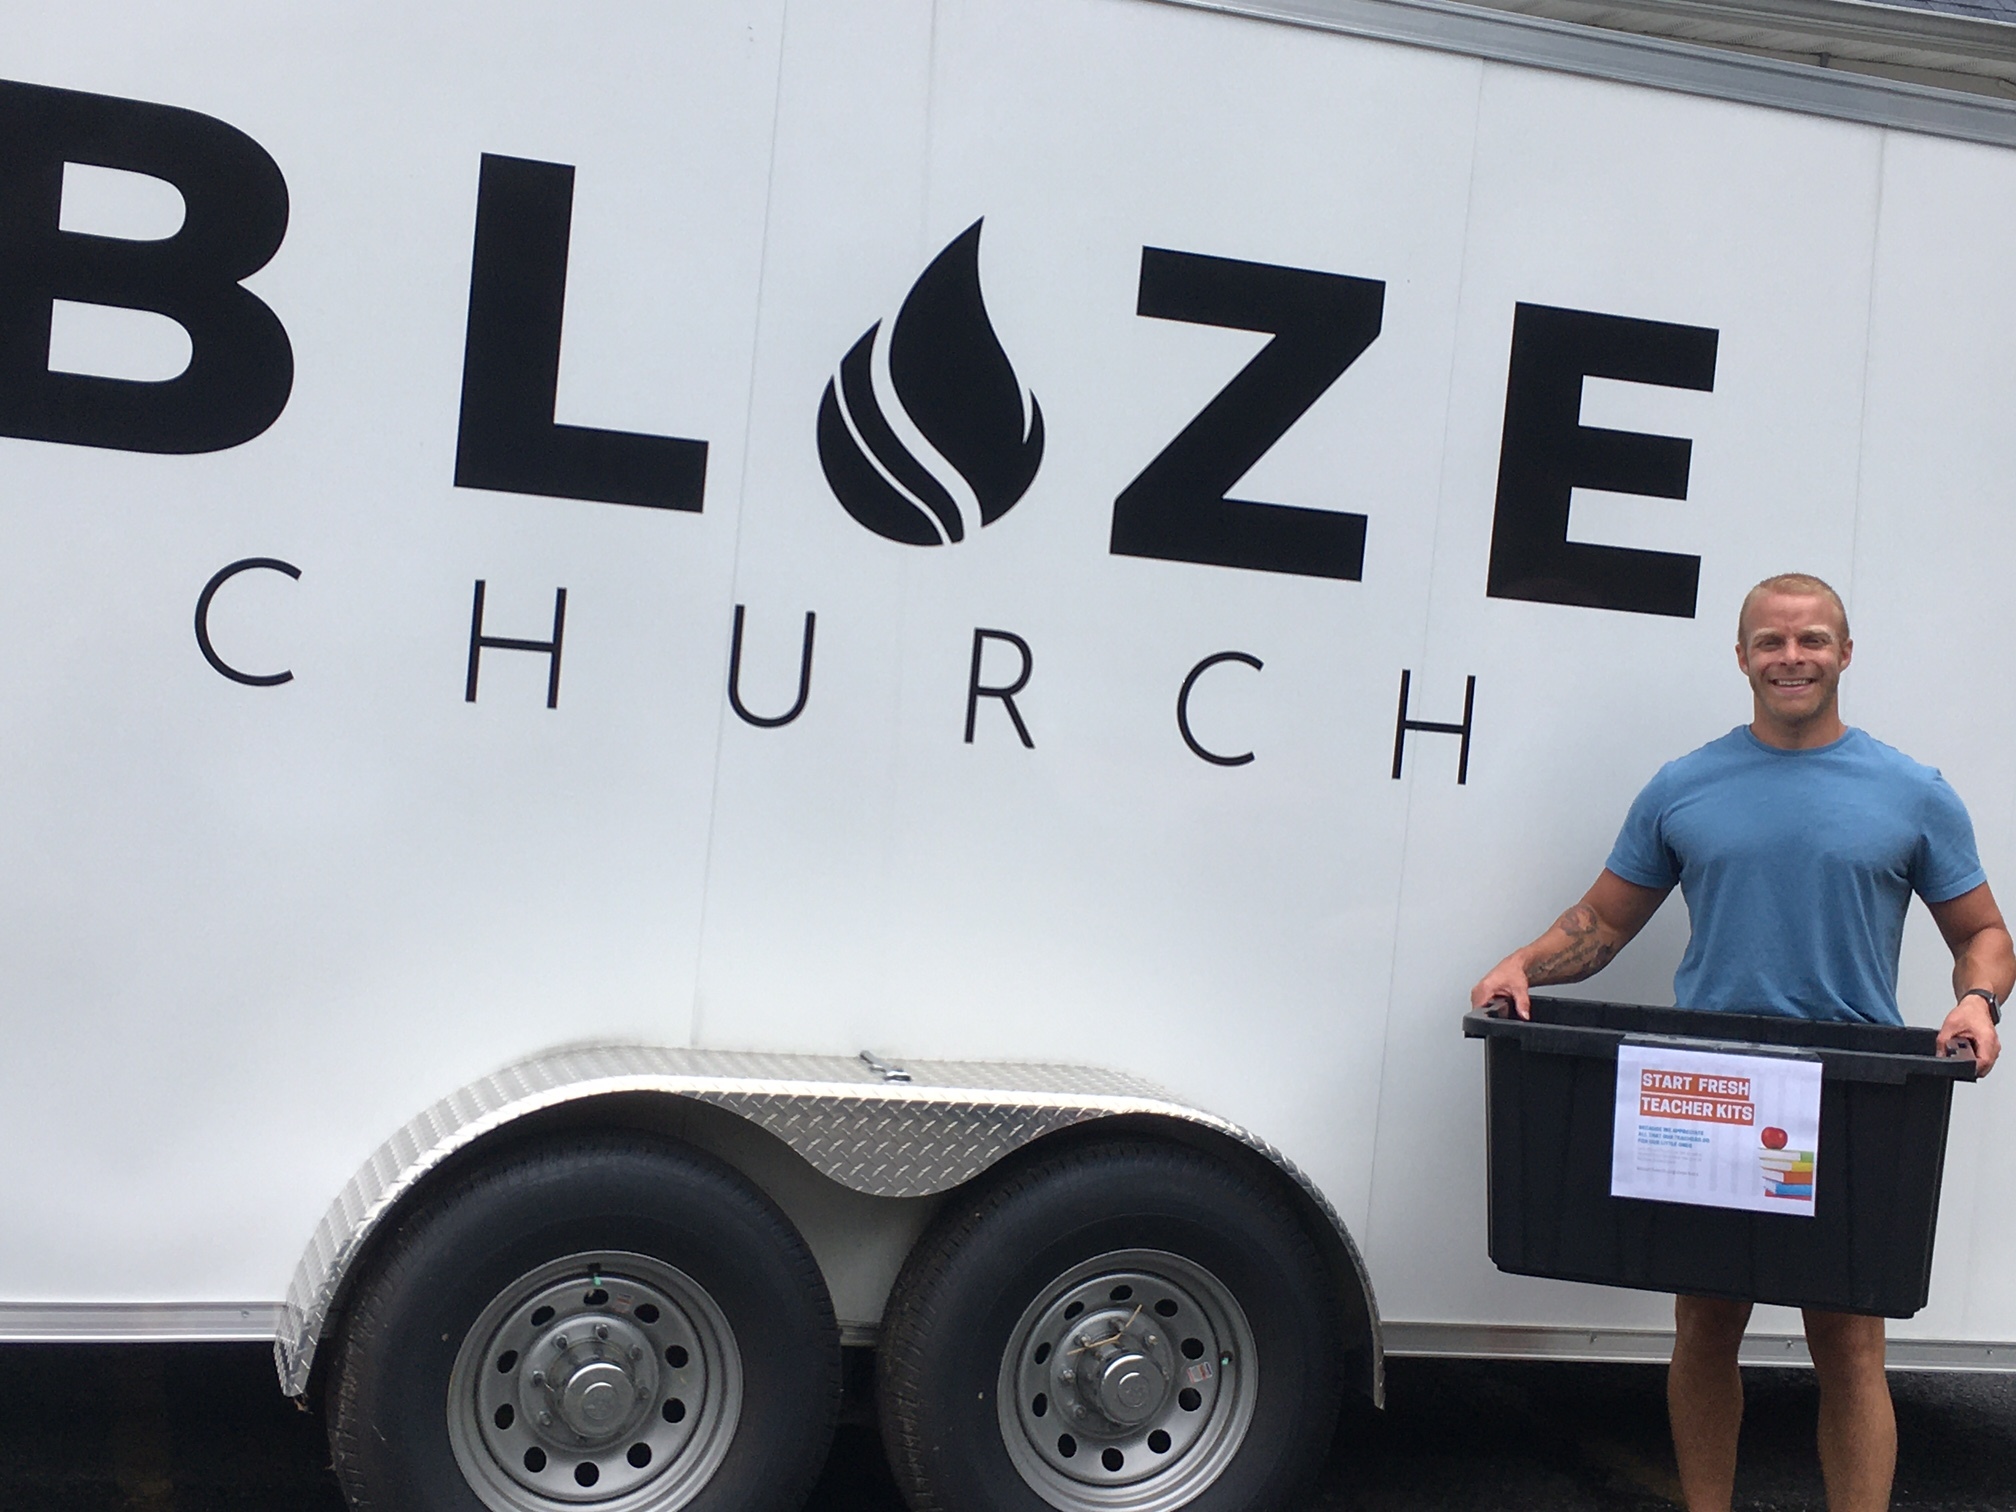 Pastor Keith Indovino gets ready to begin collecting donations to the Blaze Church  